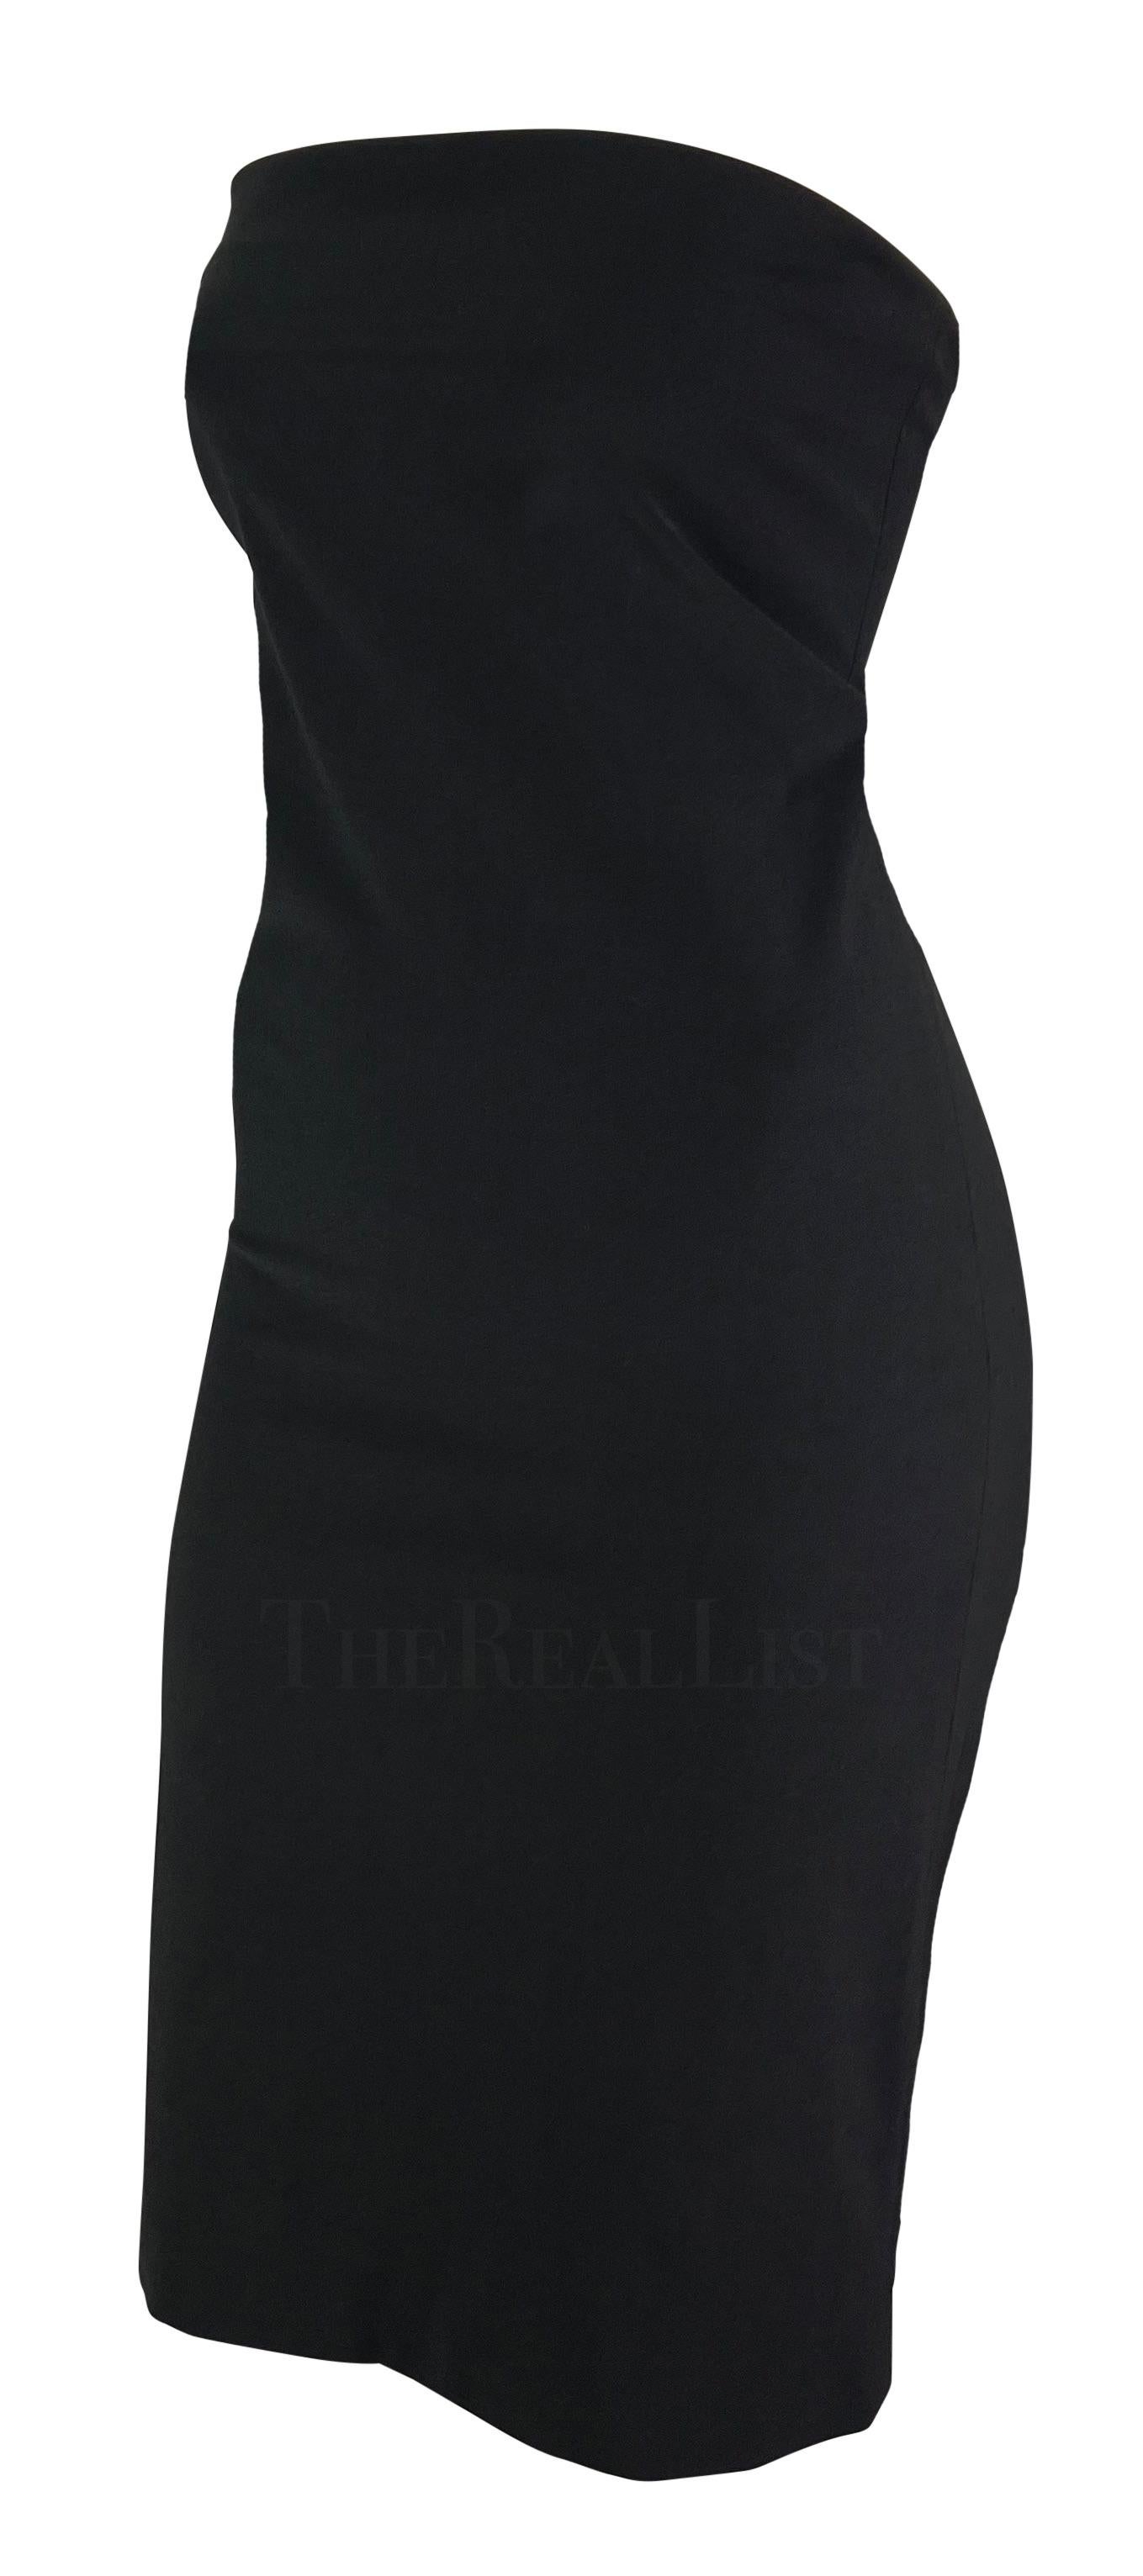 S/S 1997 Gucci by Tom Ford Black Strapless Bodycon Mini Dress  In Excellent Condition For Sale In West Hollywood, CA